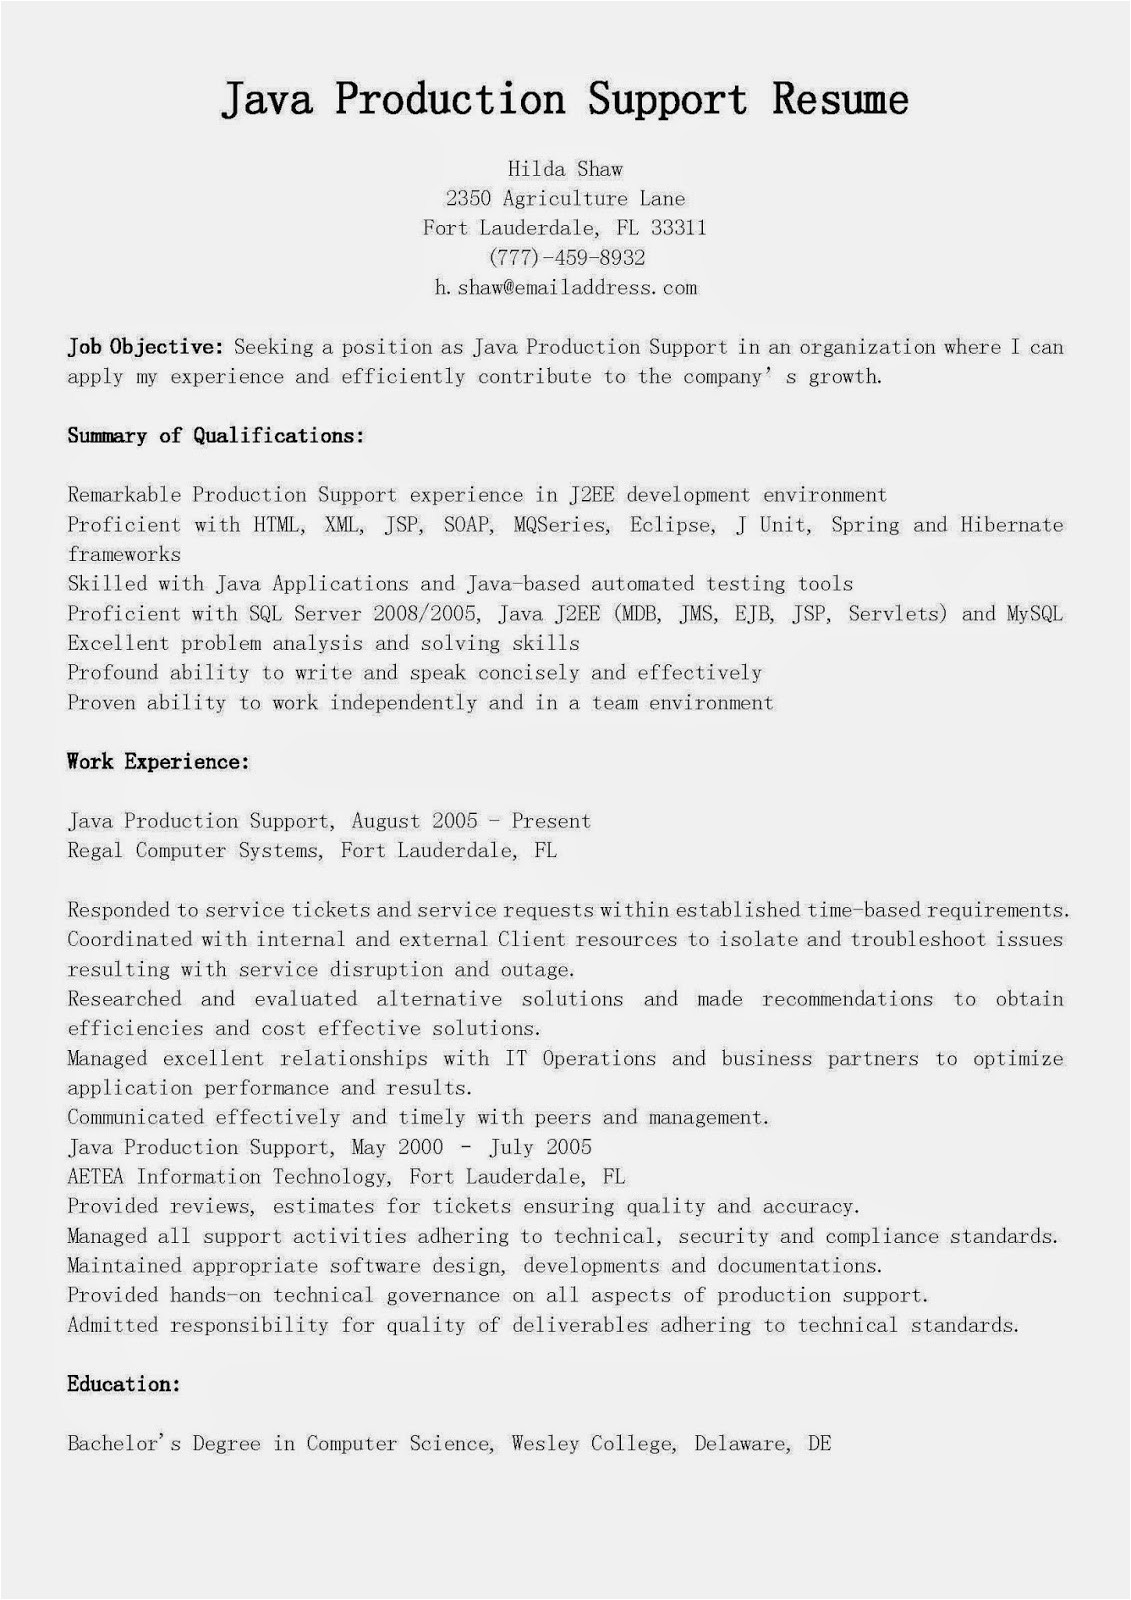 java production support resume sample